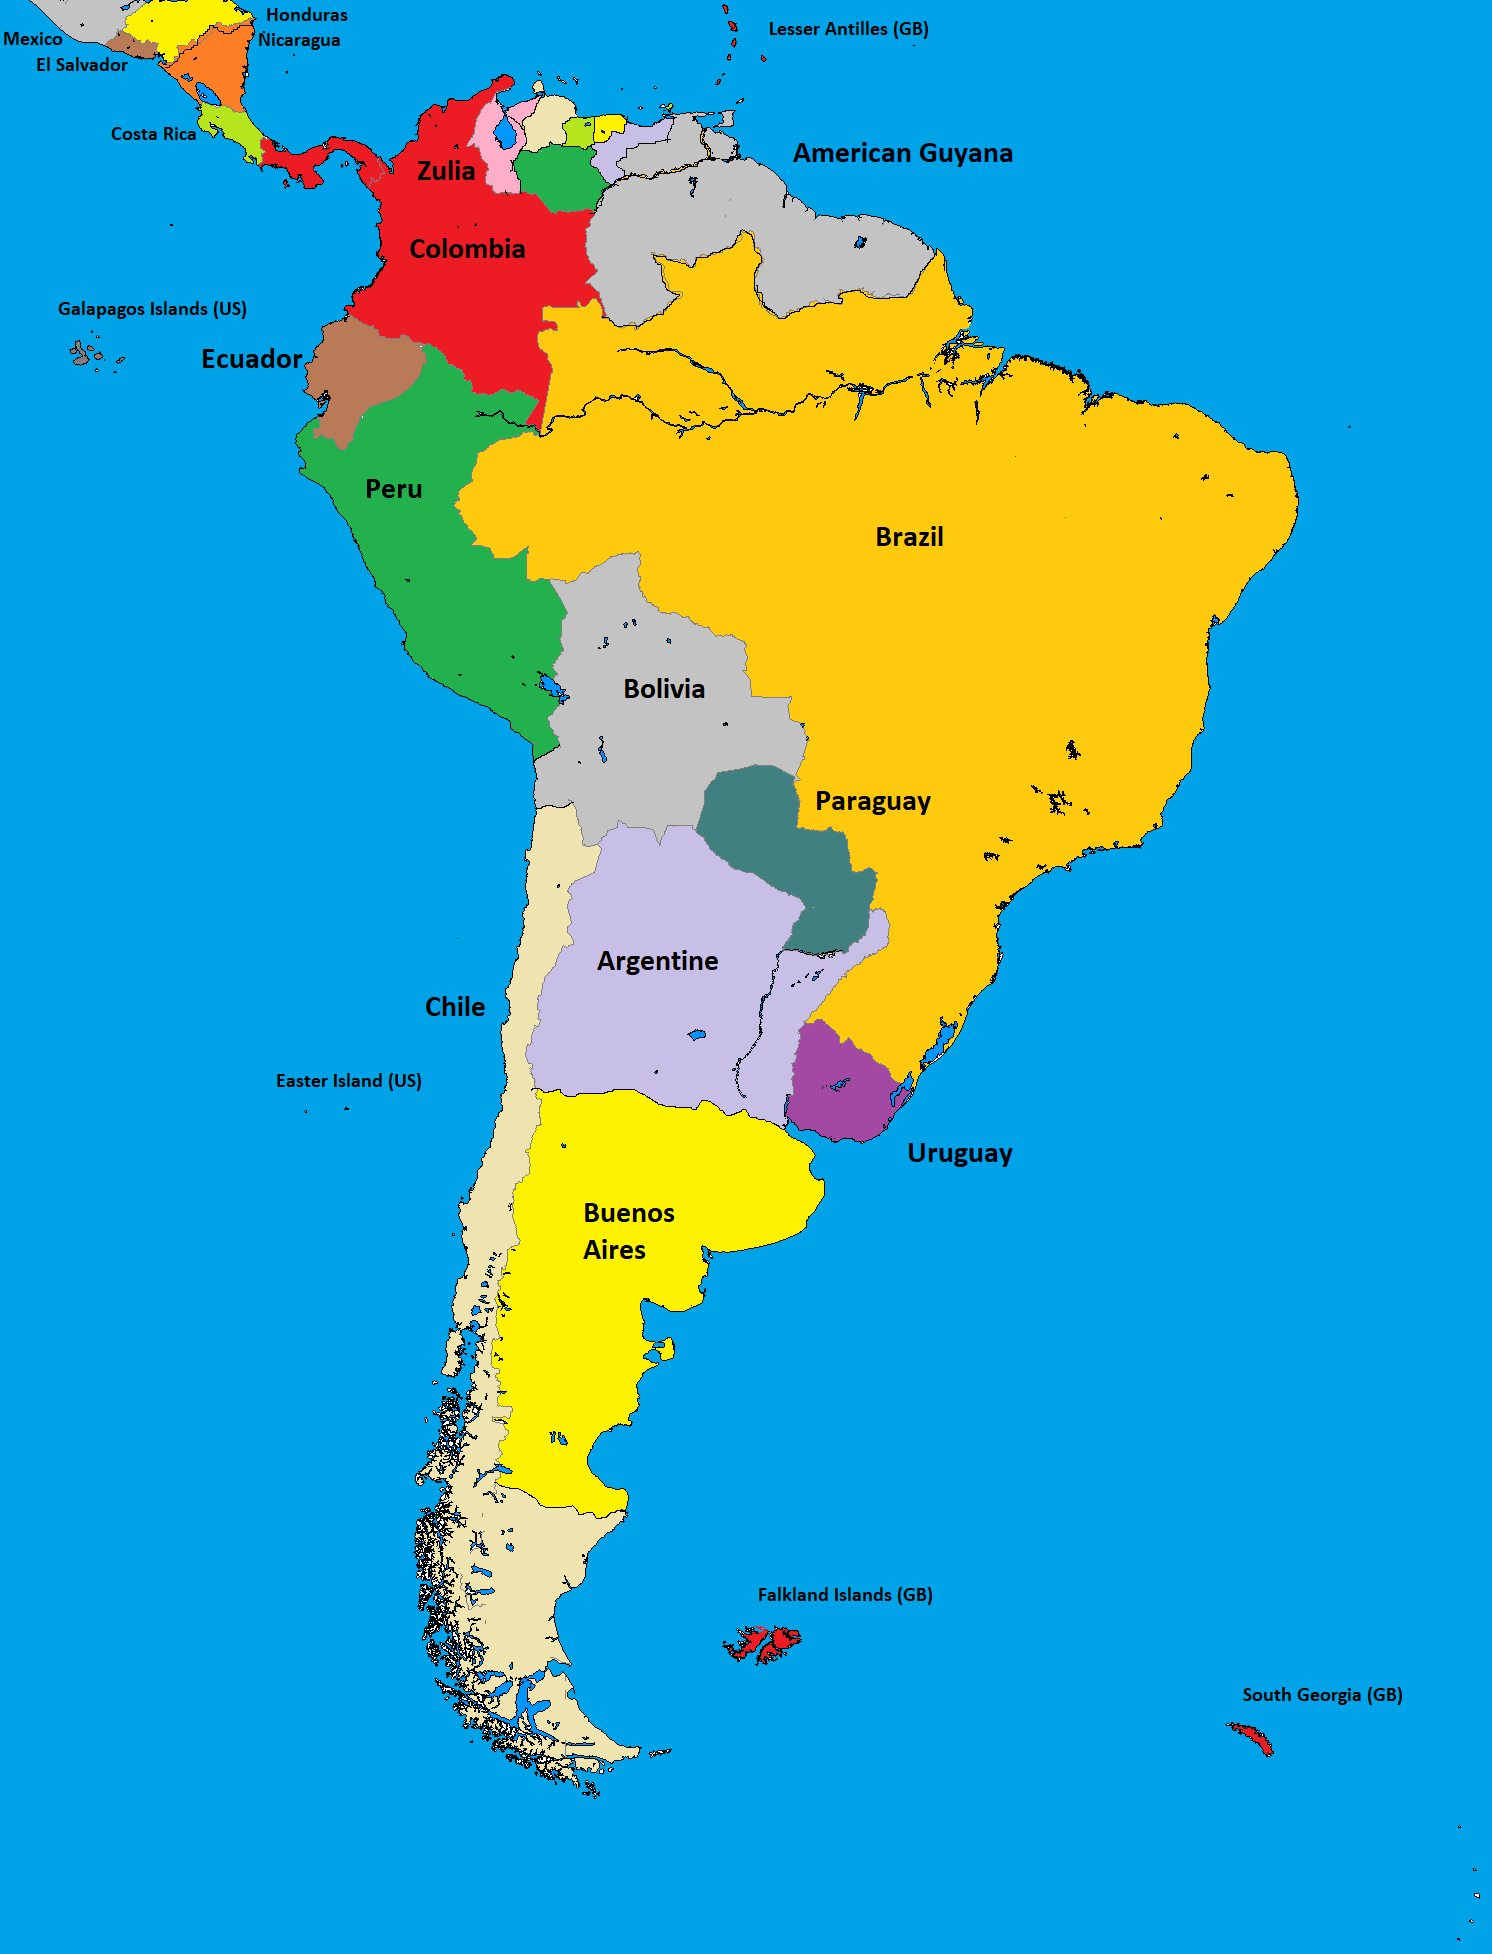 Fenians - Map of South America - 1885.png